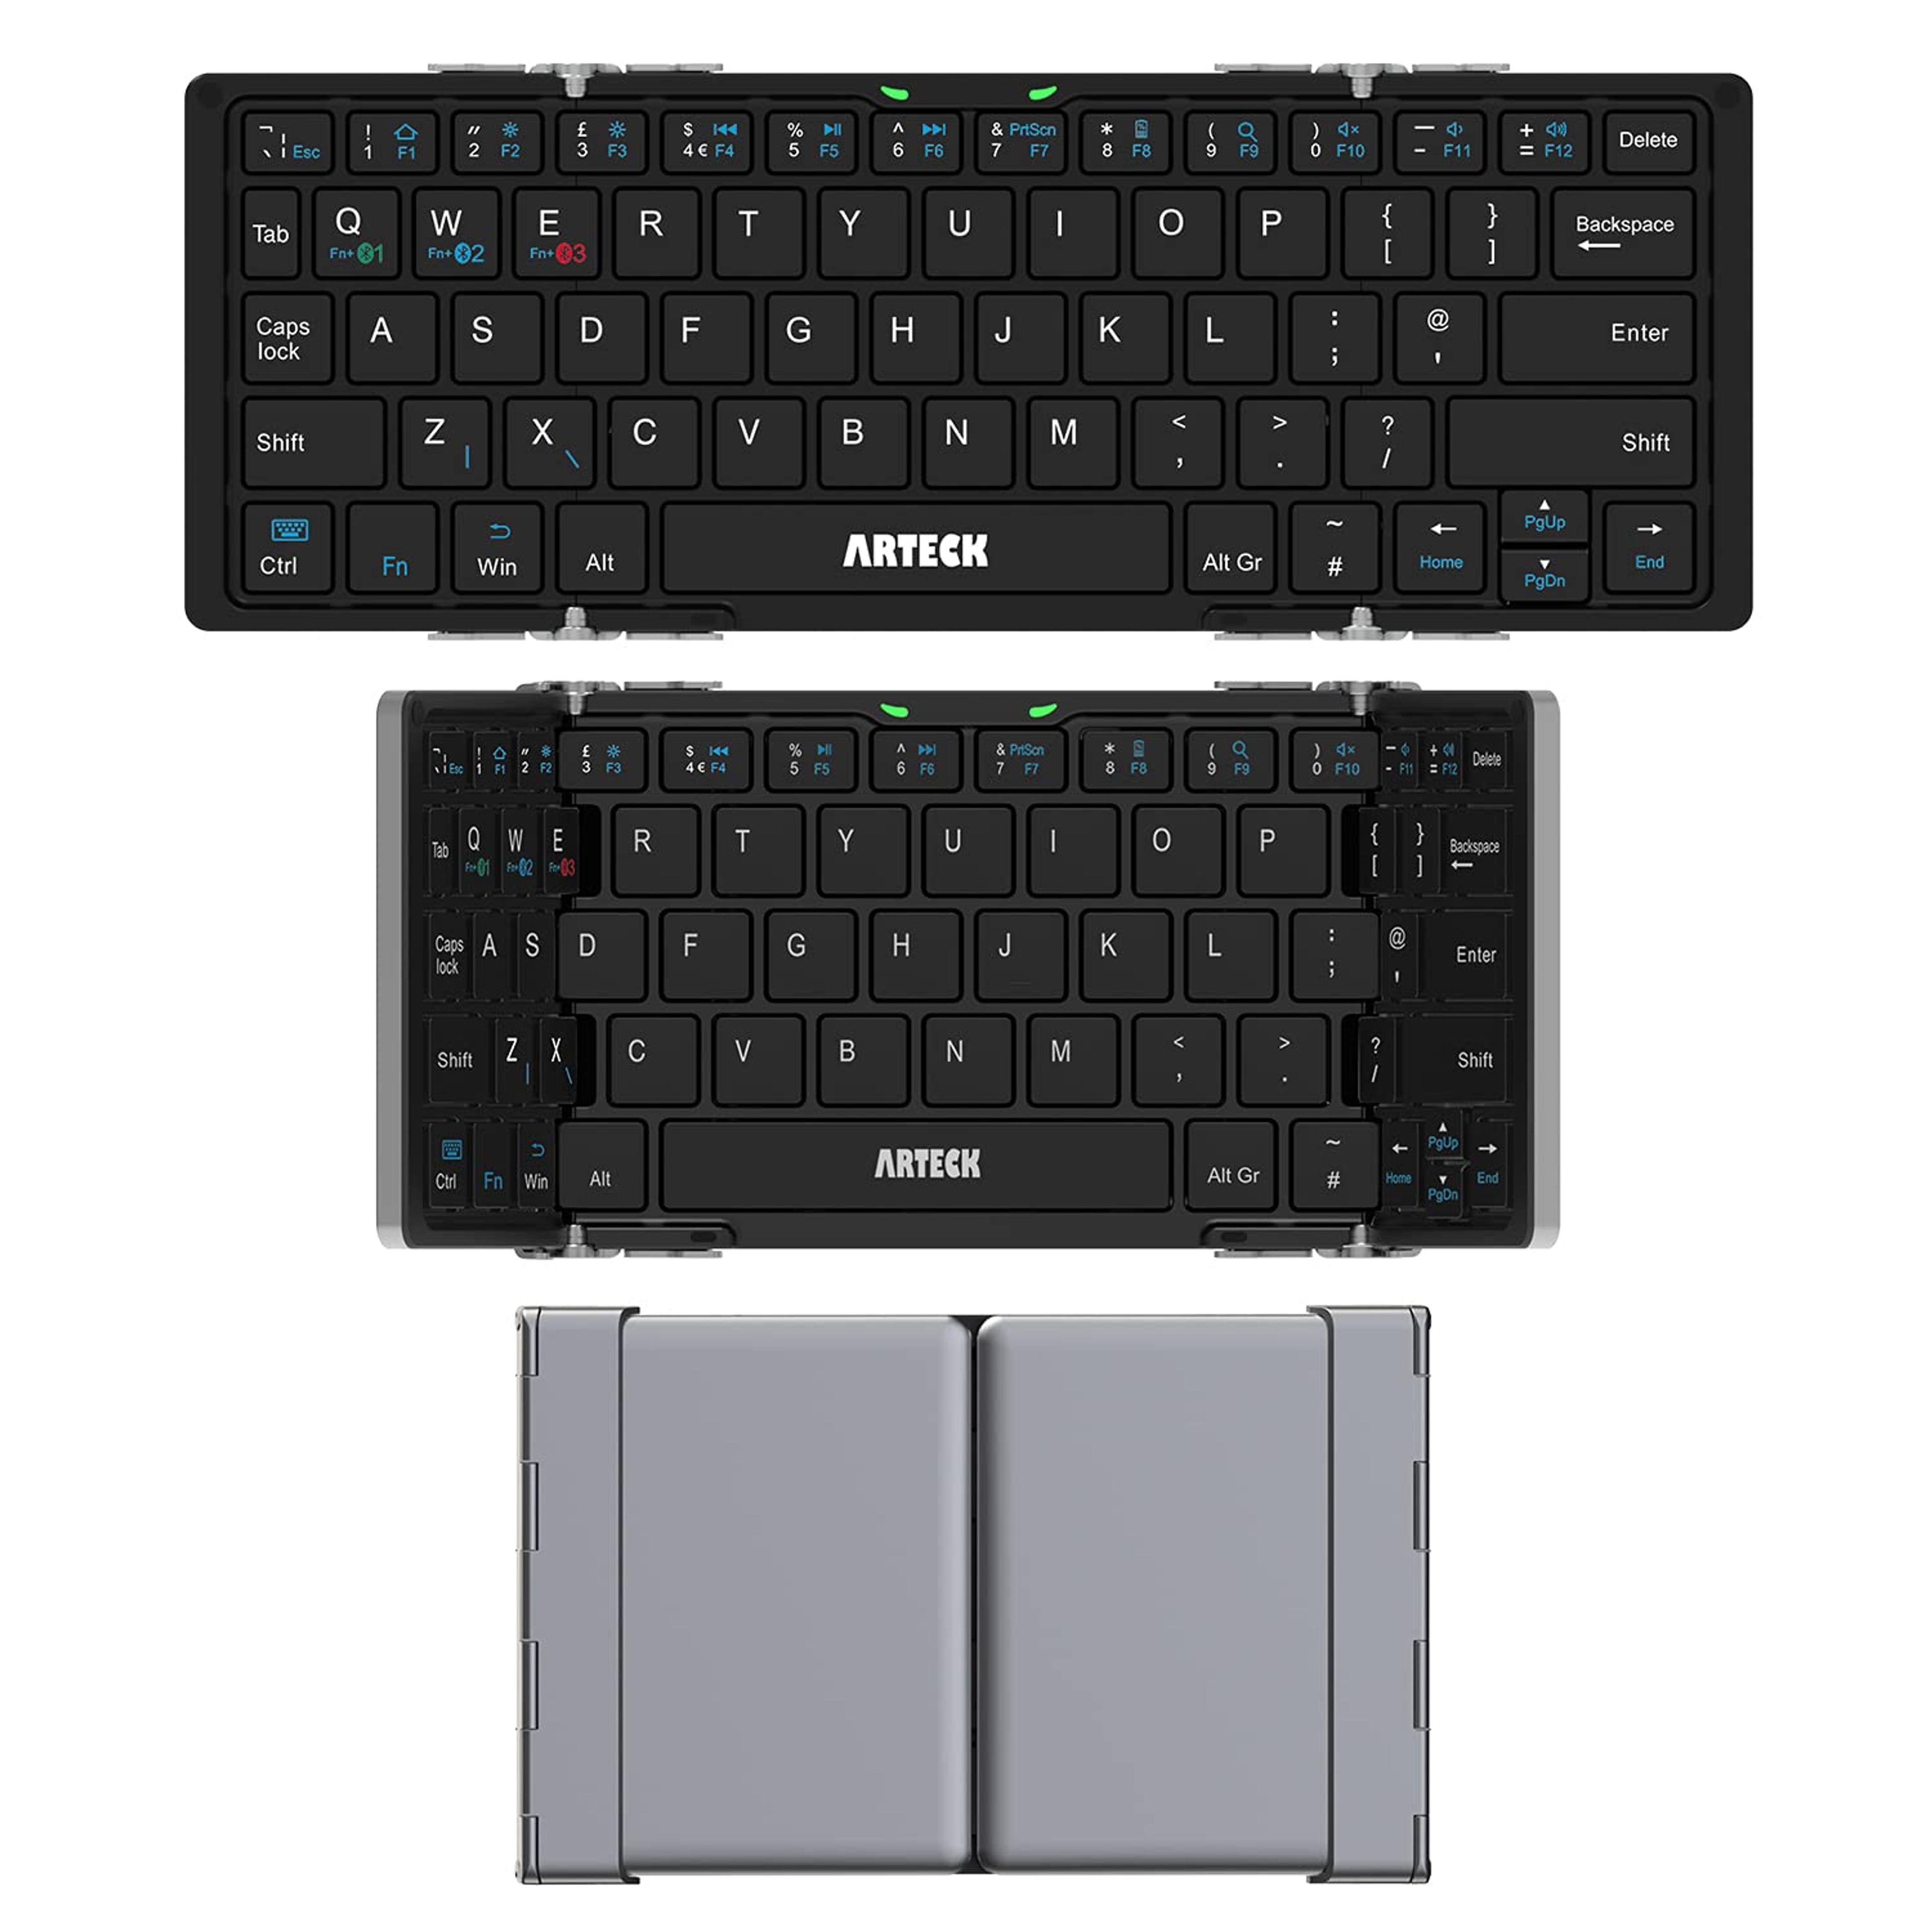 Arteck Folding Bluetooth Keyboard, Portable Folding Bluetooth Keyboard Ultra-Slim Mini Wireless Keyboard for iOS Android Windows PC Tablet Smartphone Built in Rechargeable Li-polymer Battery : Amazon.co.uk: Computers & Accessories